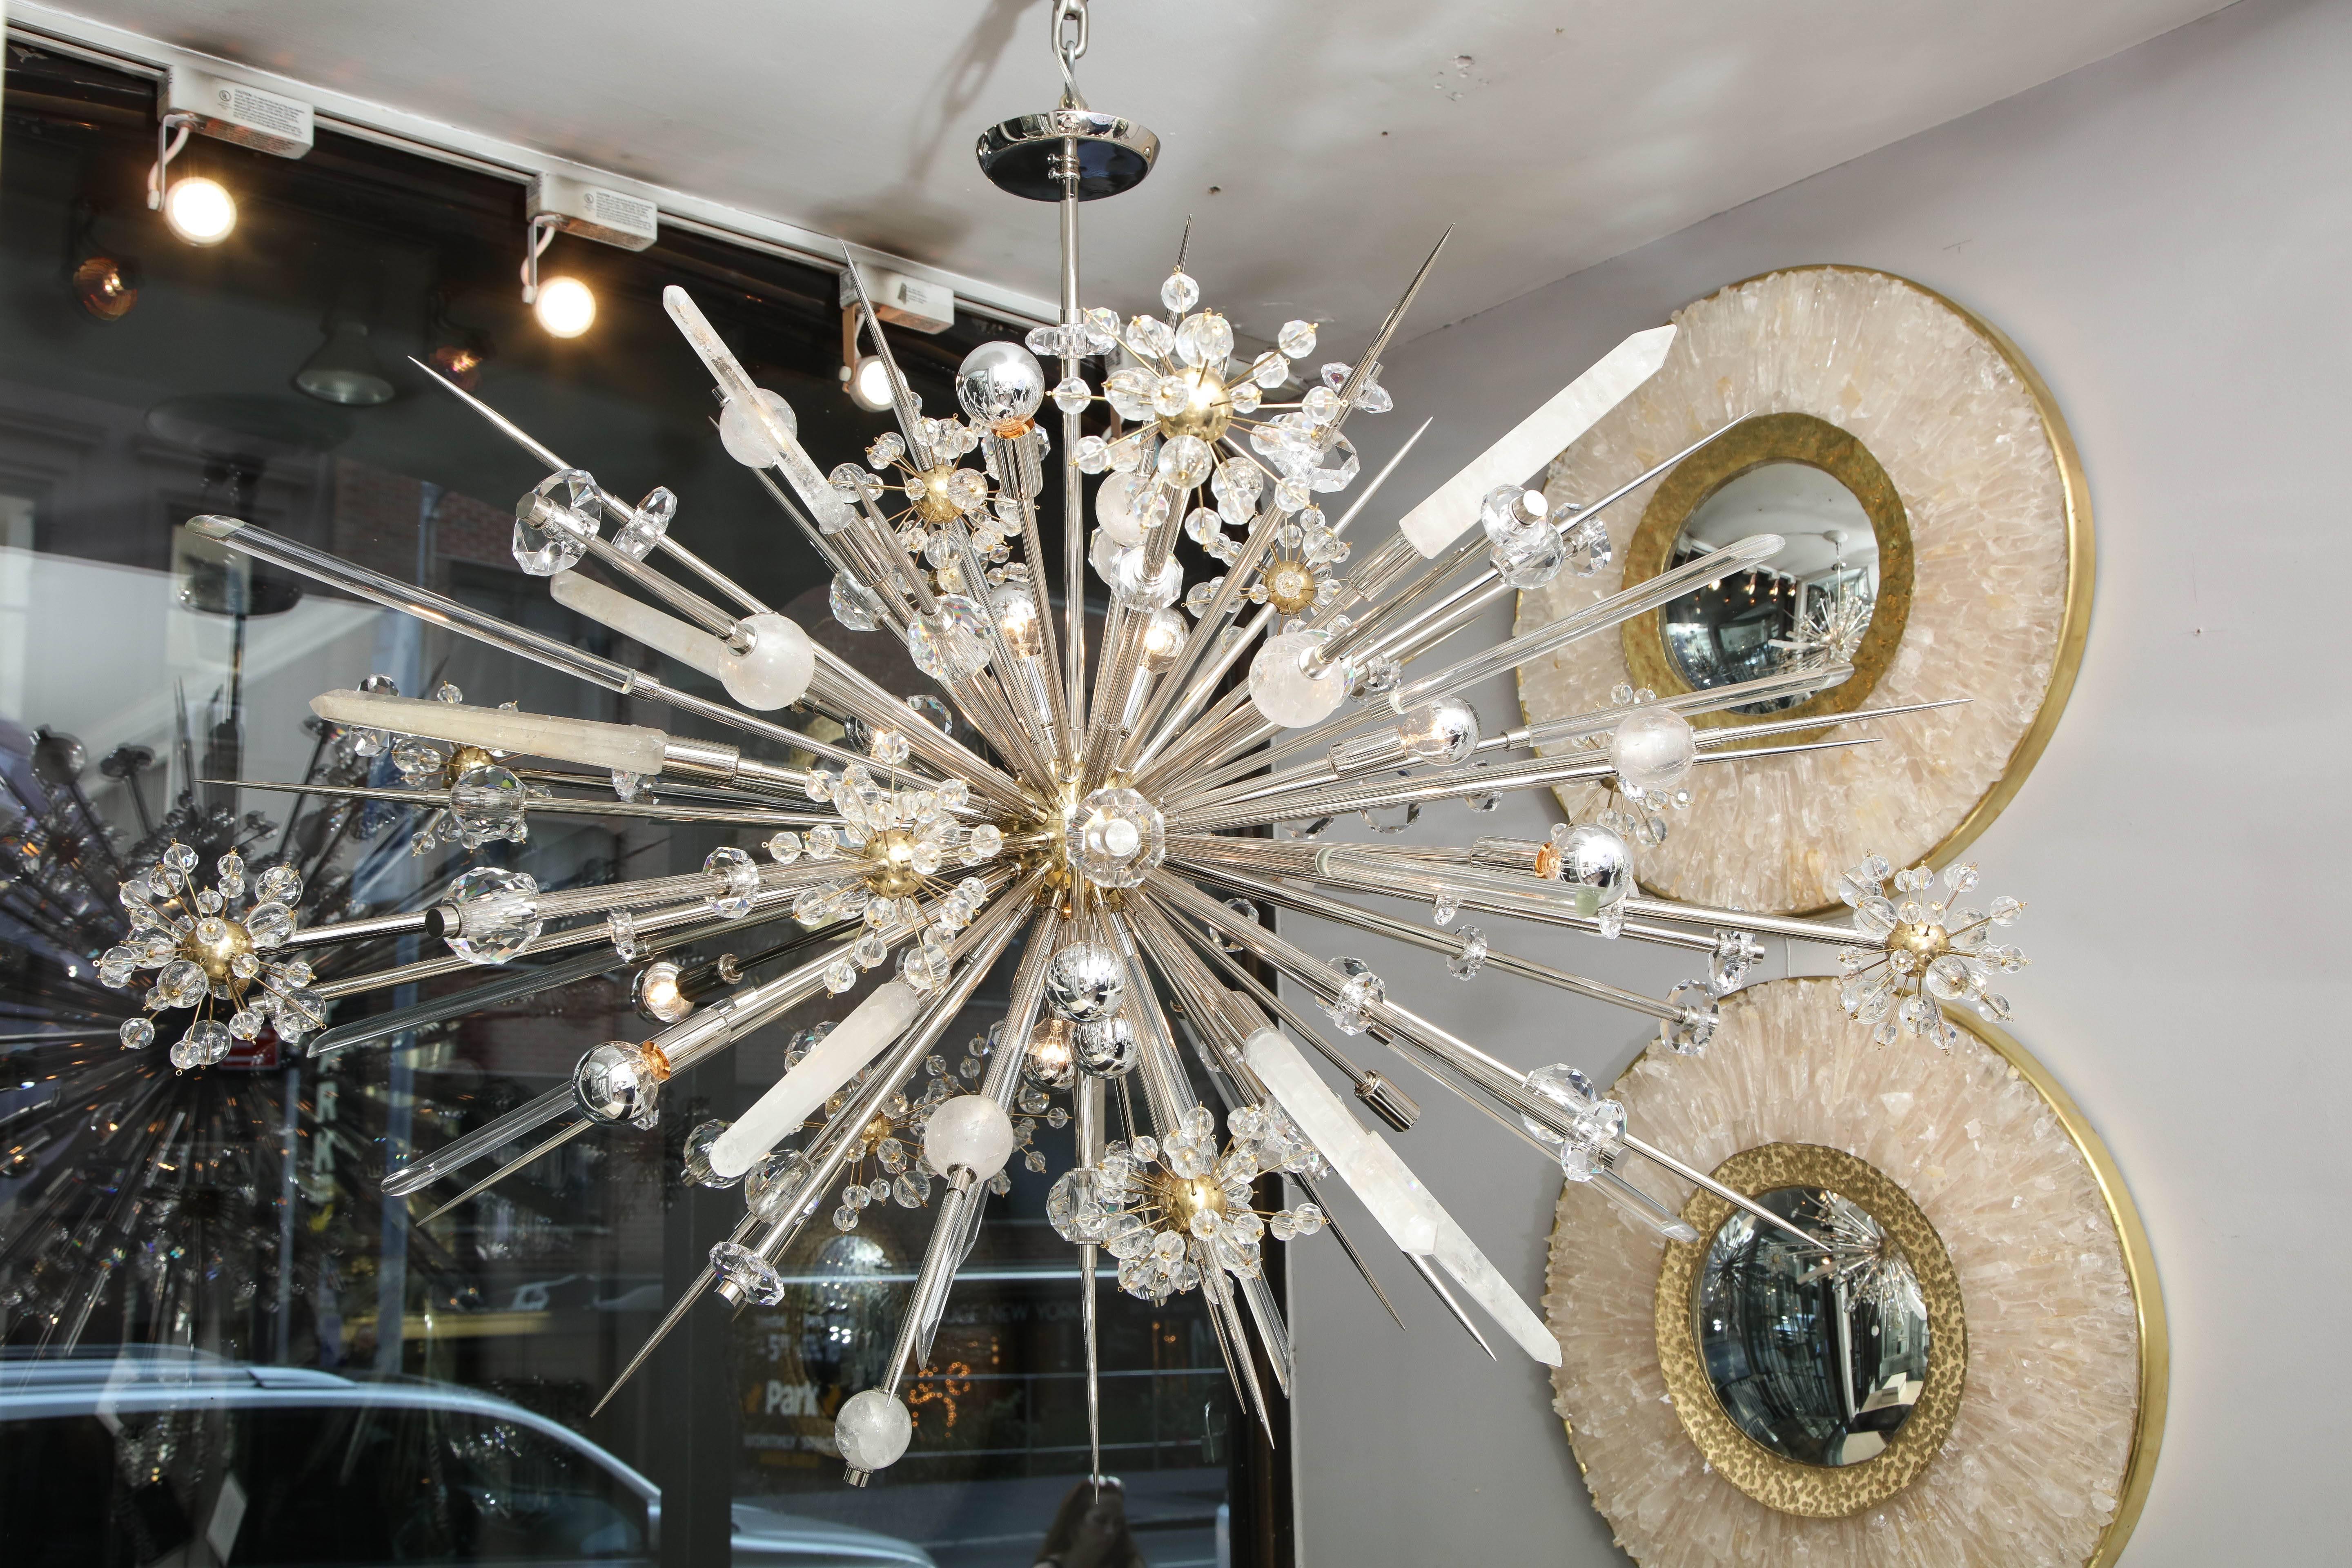 Elegant and iconic chandelier that is flexible in customization to your preference. The chandelier listed was made in polished nickel and polished brass finish on crystal cluster sphere and center sphere.